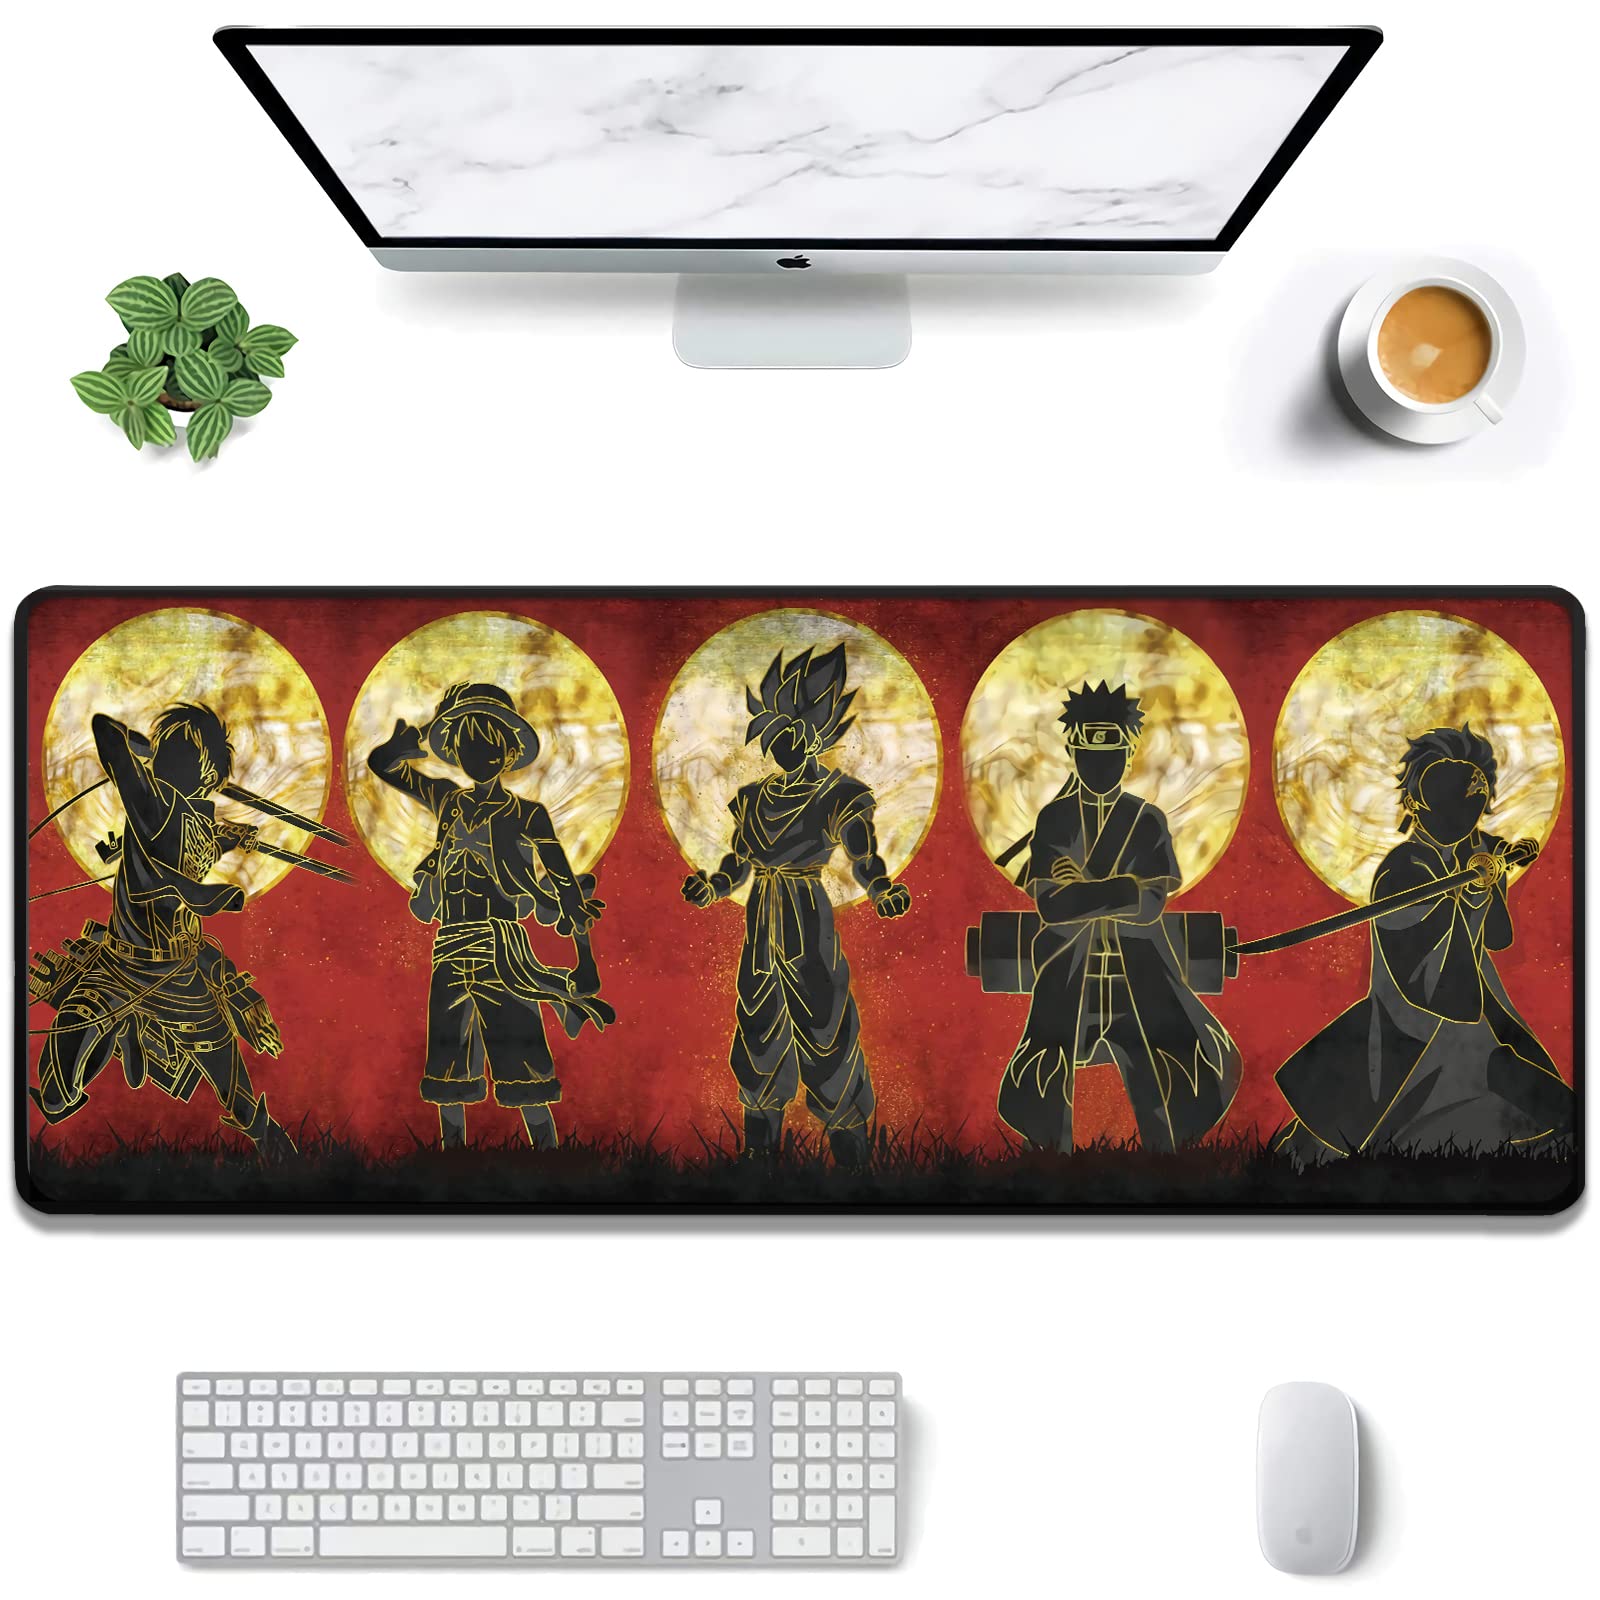 Share more than 185 anime mousepads super hot - awesomeenglish.edu.vn